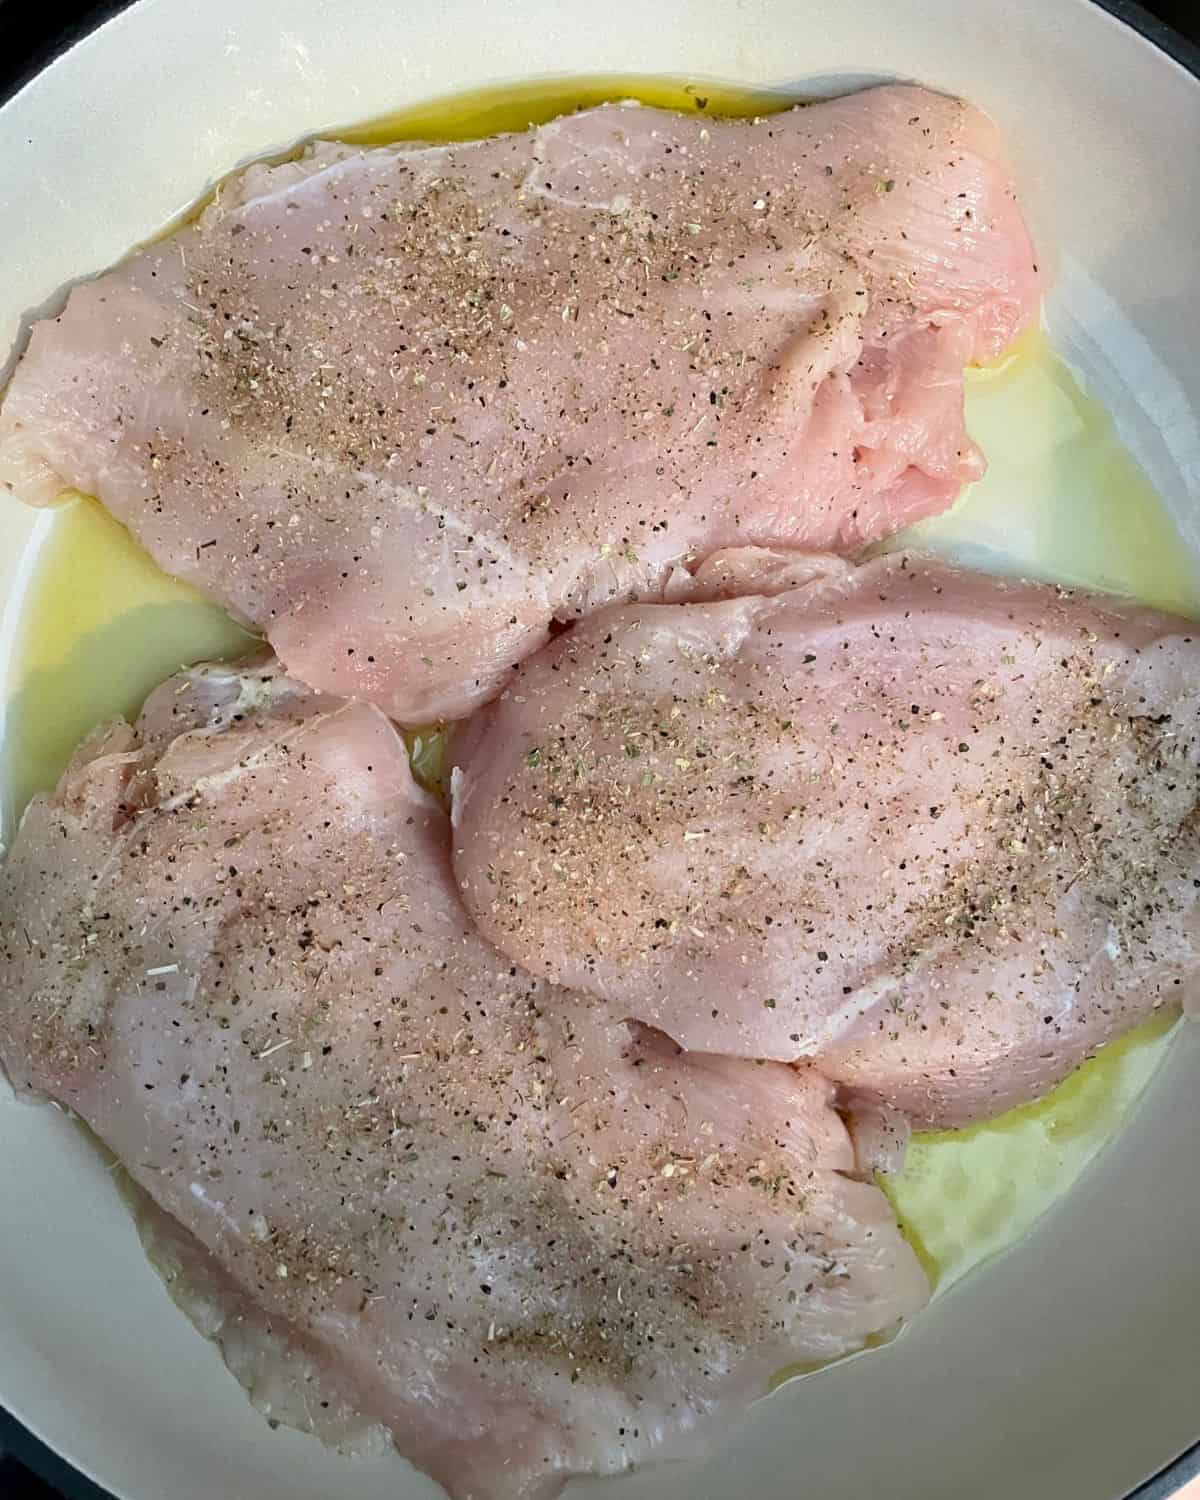 Seasoned chicken breasts cooking in olive oil in a skillet.